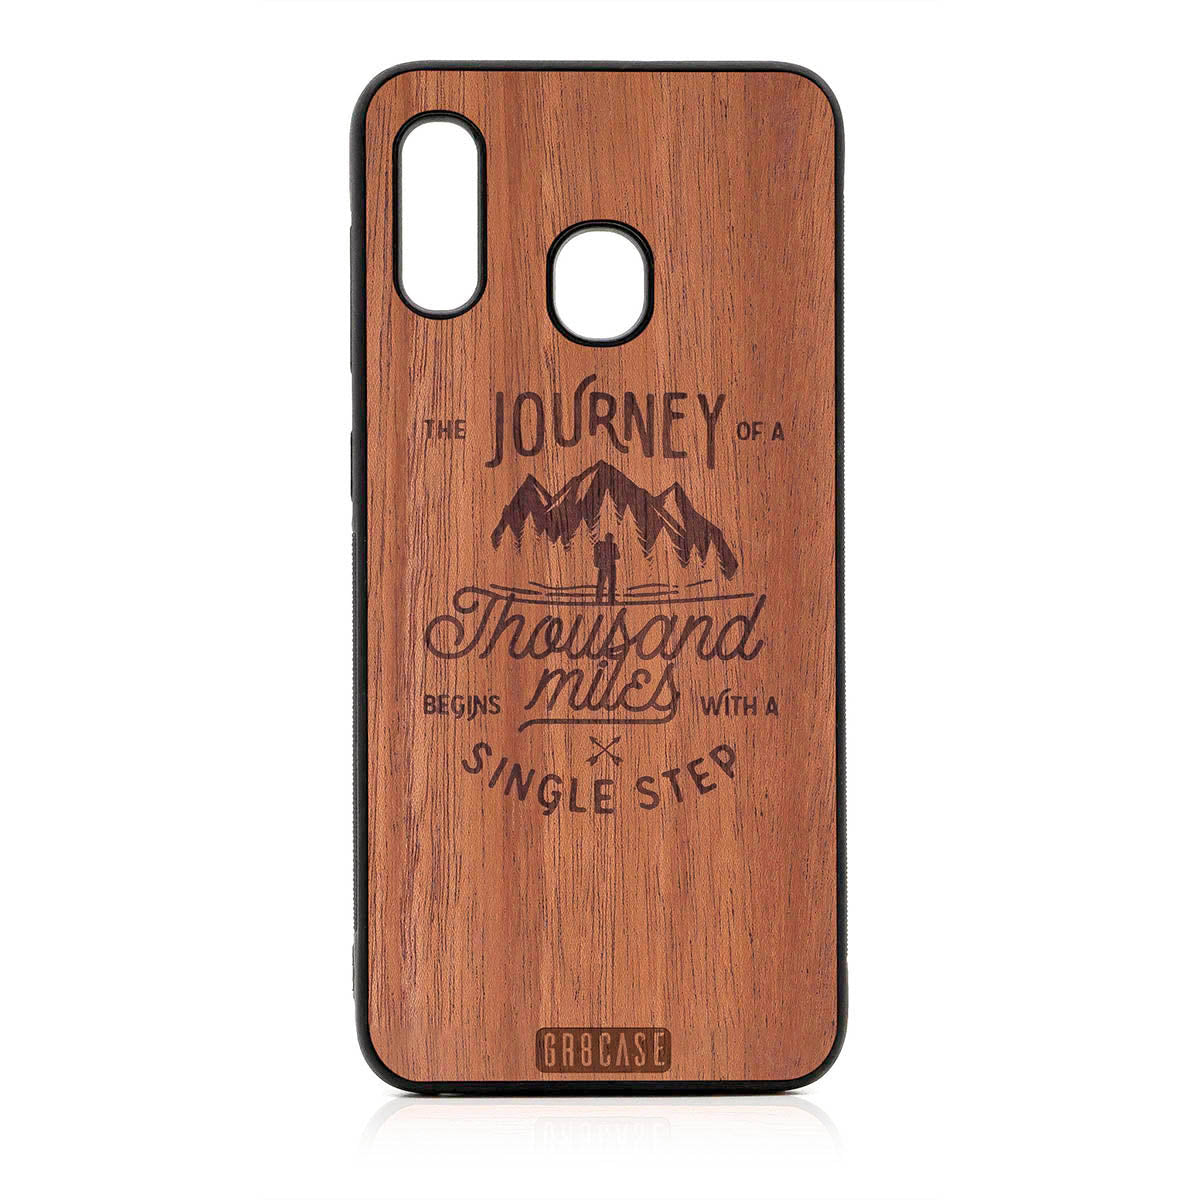 The Journey Of A Thousand Miles Begins With A Single Step Design Wood Case For Samsung Galaxy A20